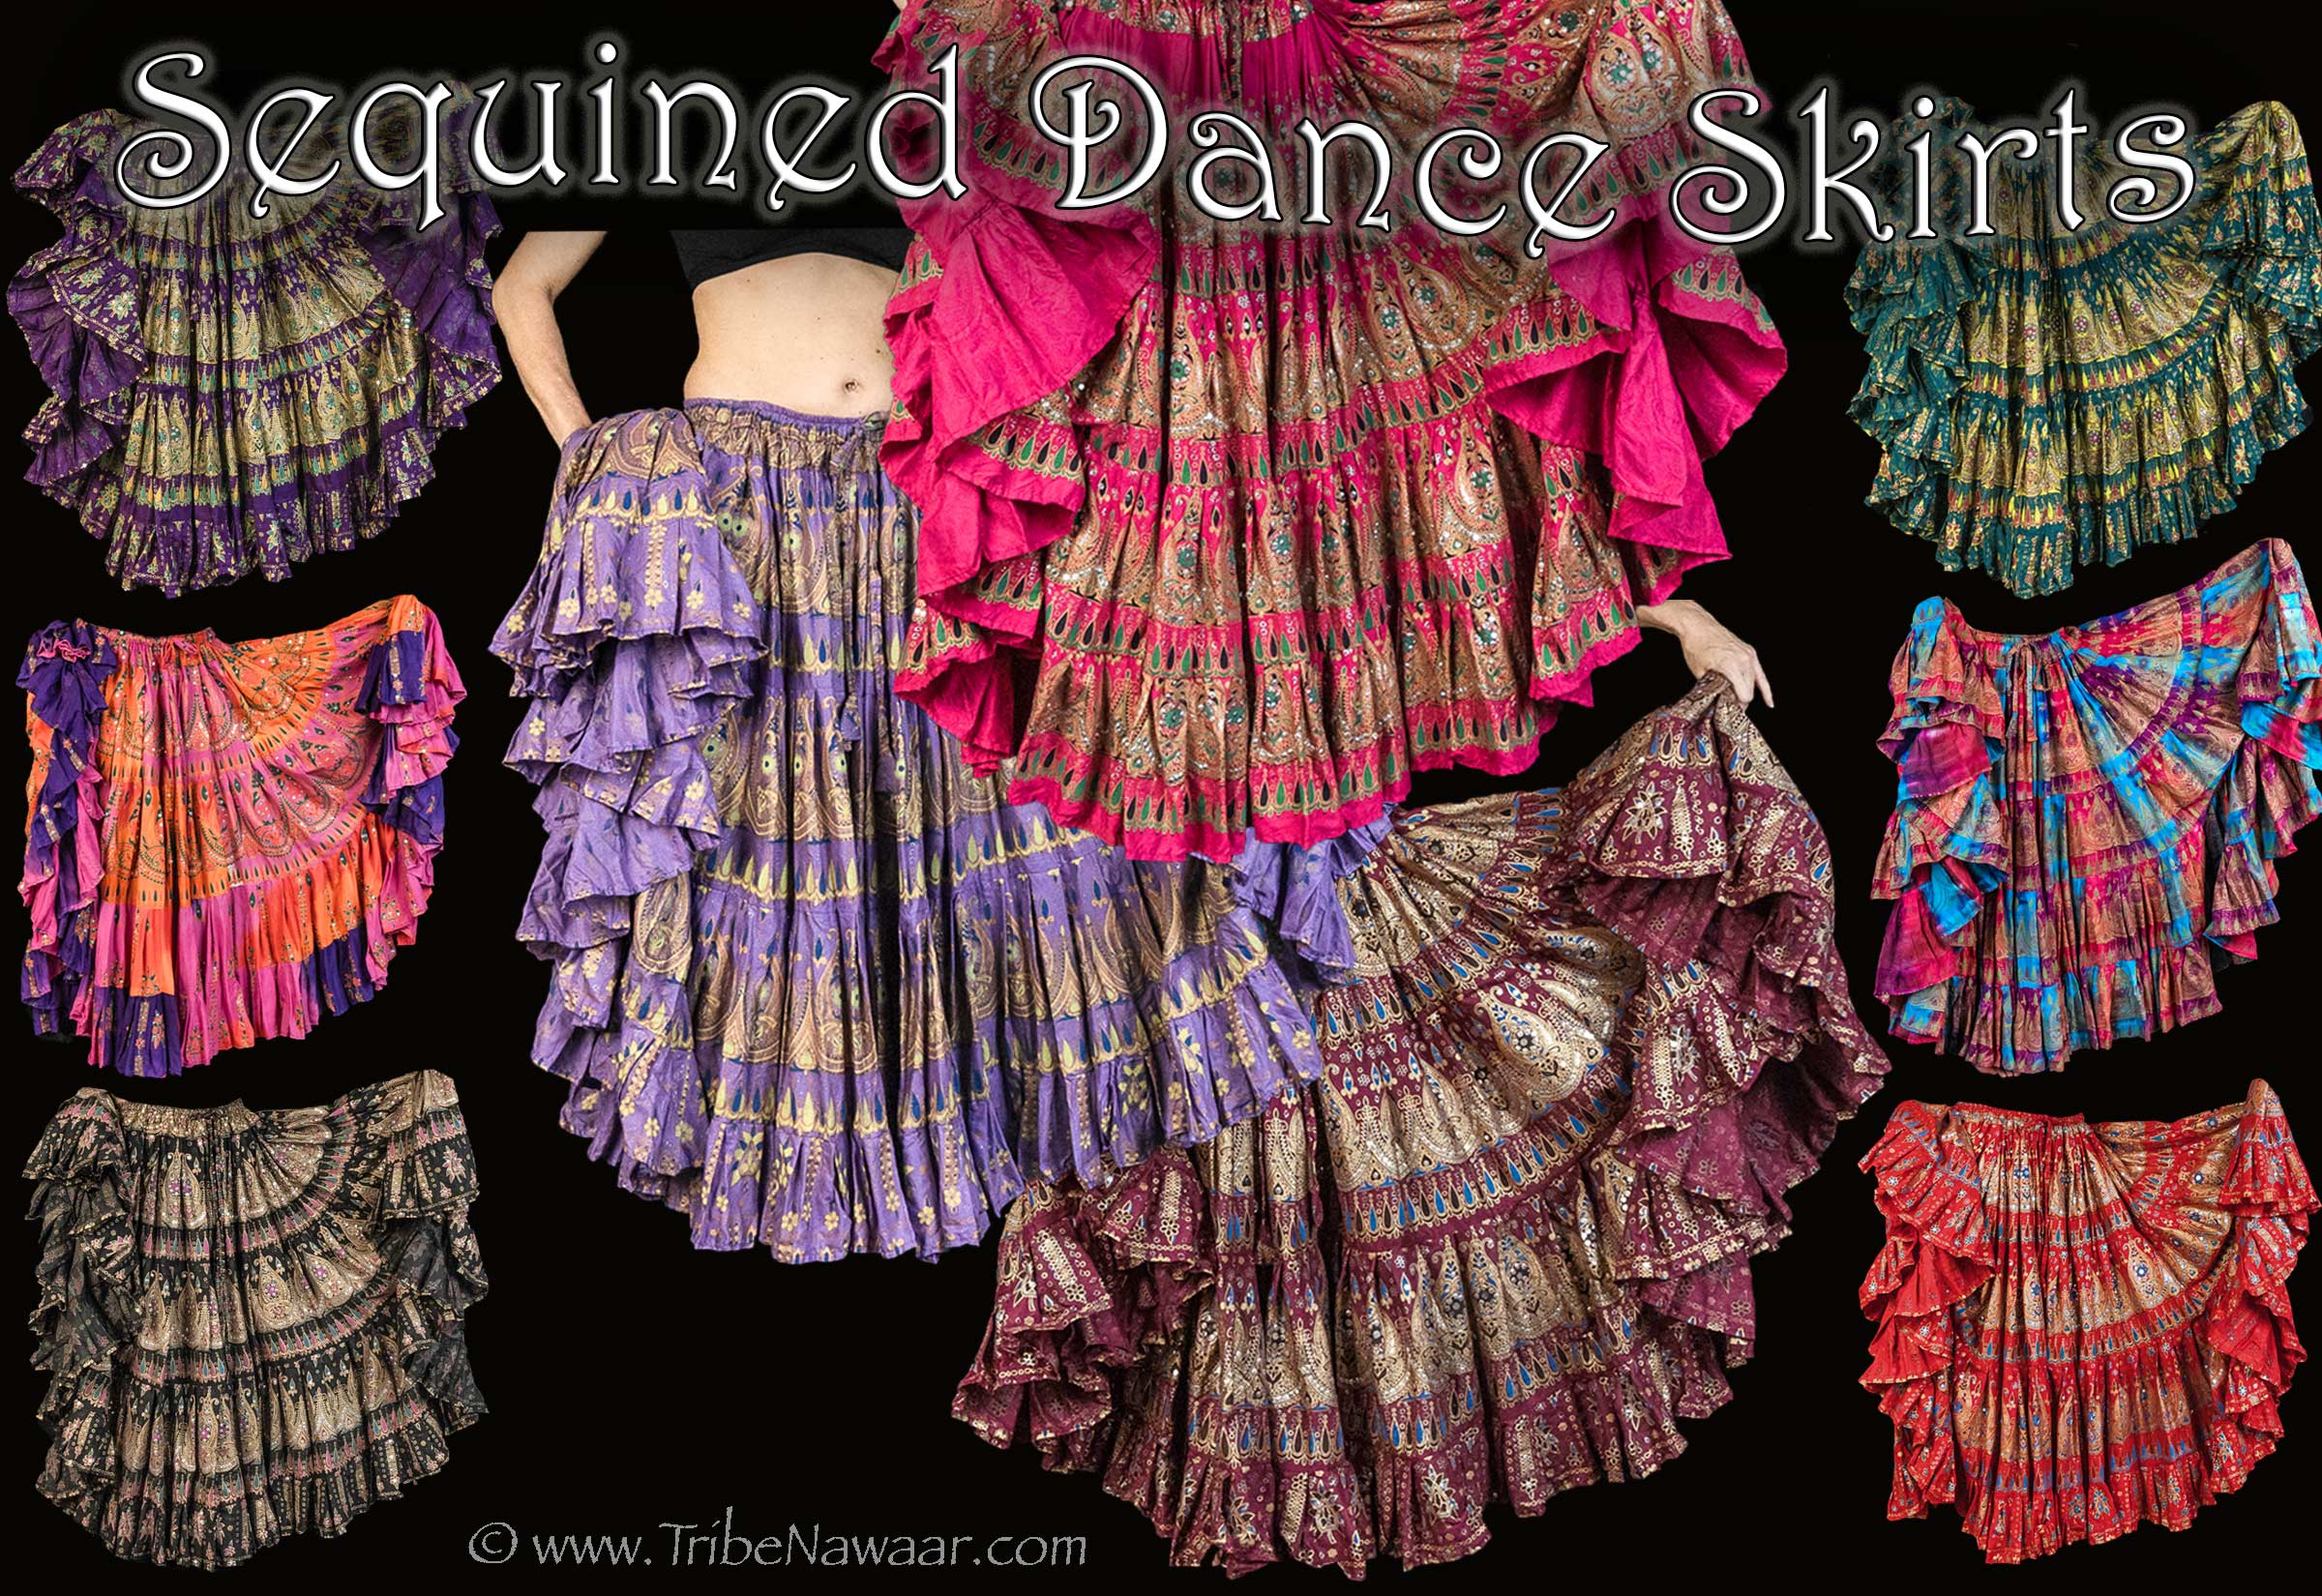 Sequined dance skirts from The Nawaar Marketplace at www.TribeNawaar.com Excellent for ATS, FCBD style belly dance and folkloric skirt dances!